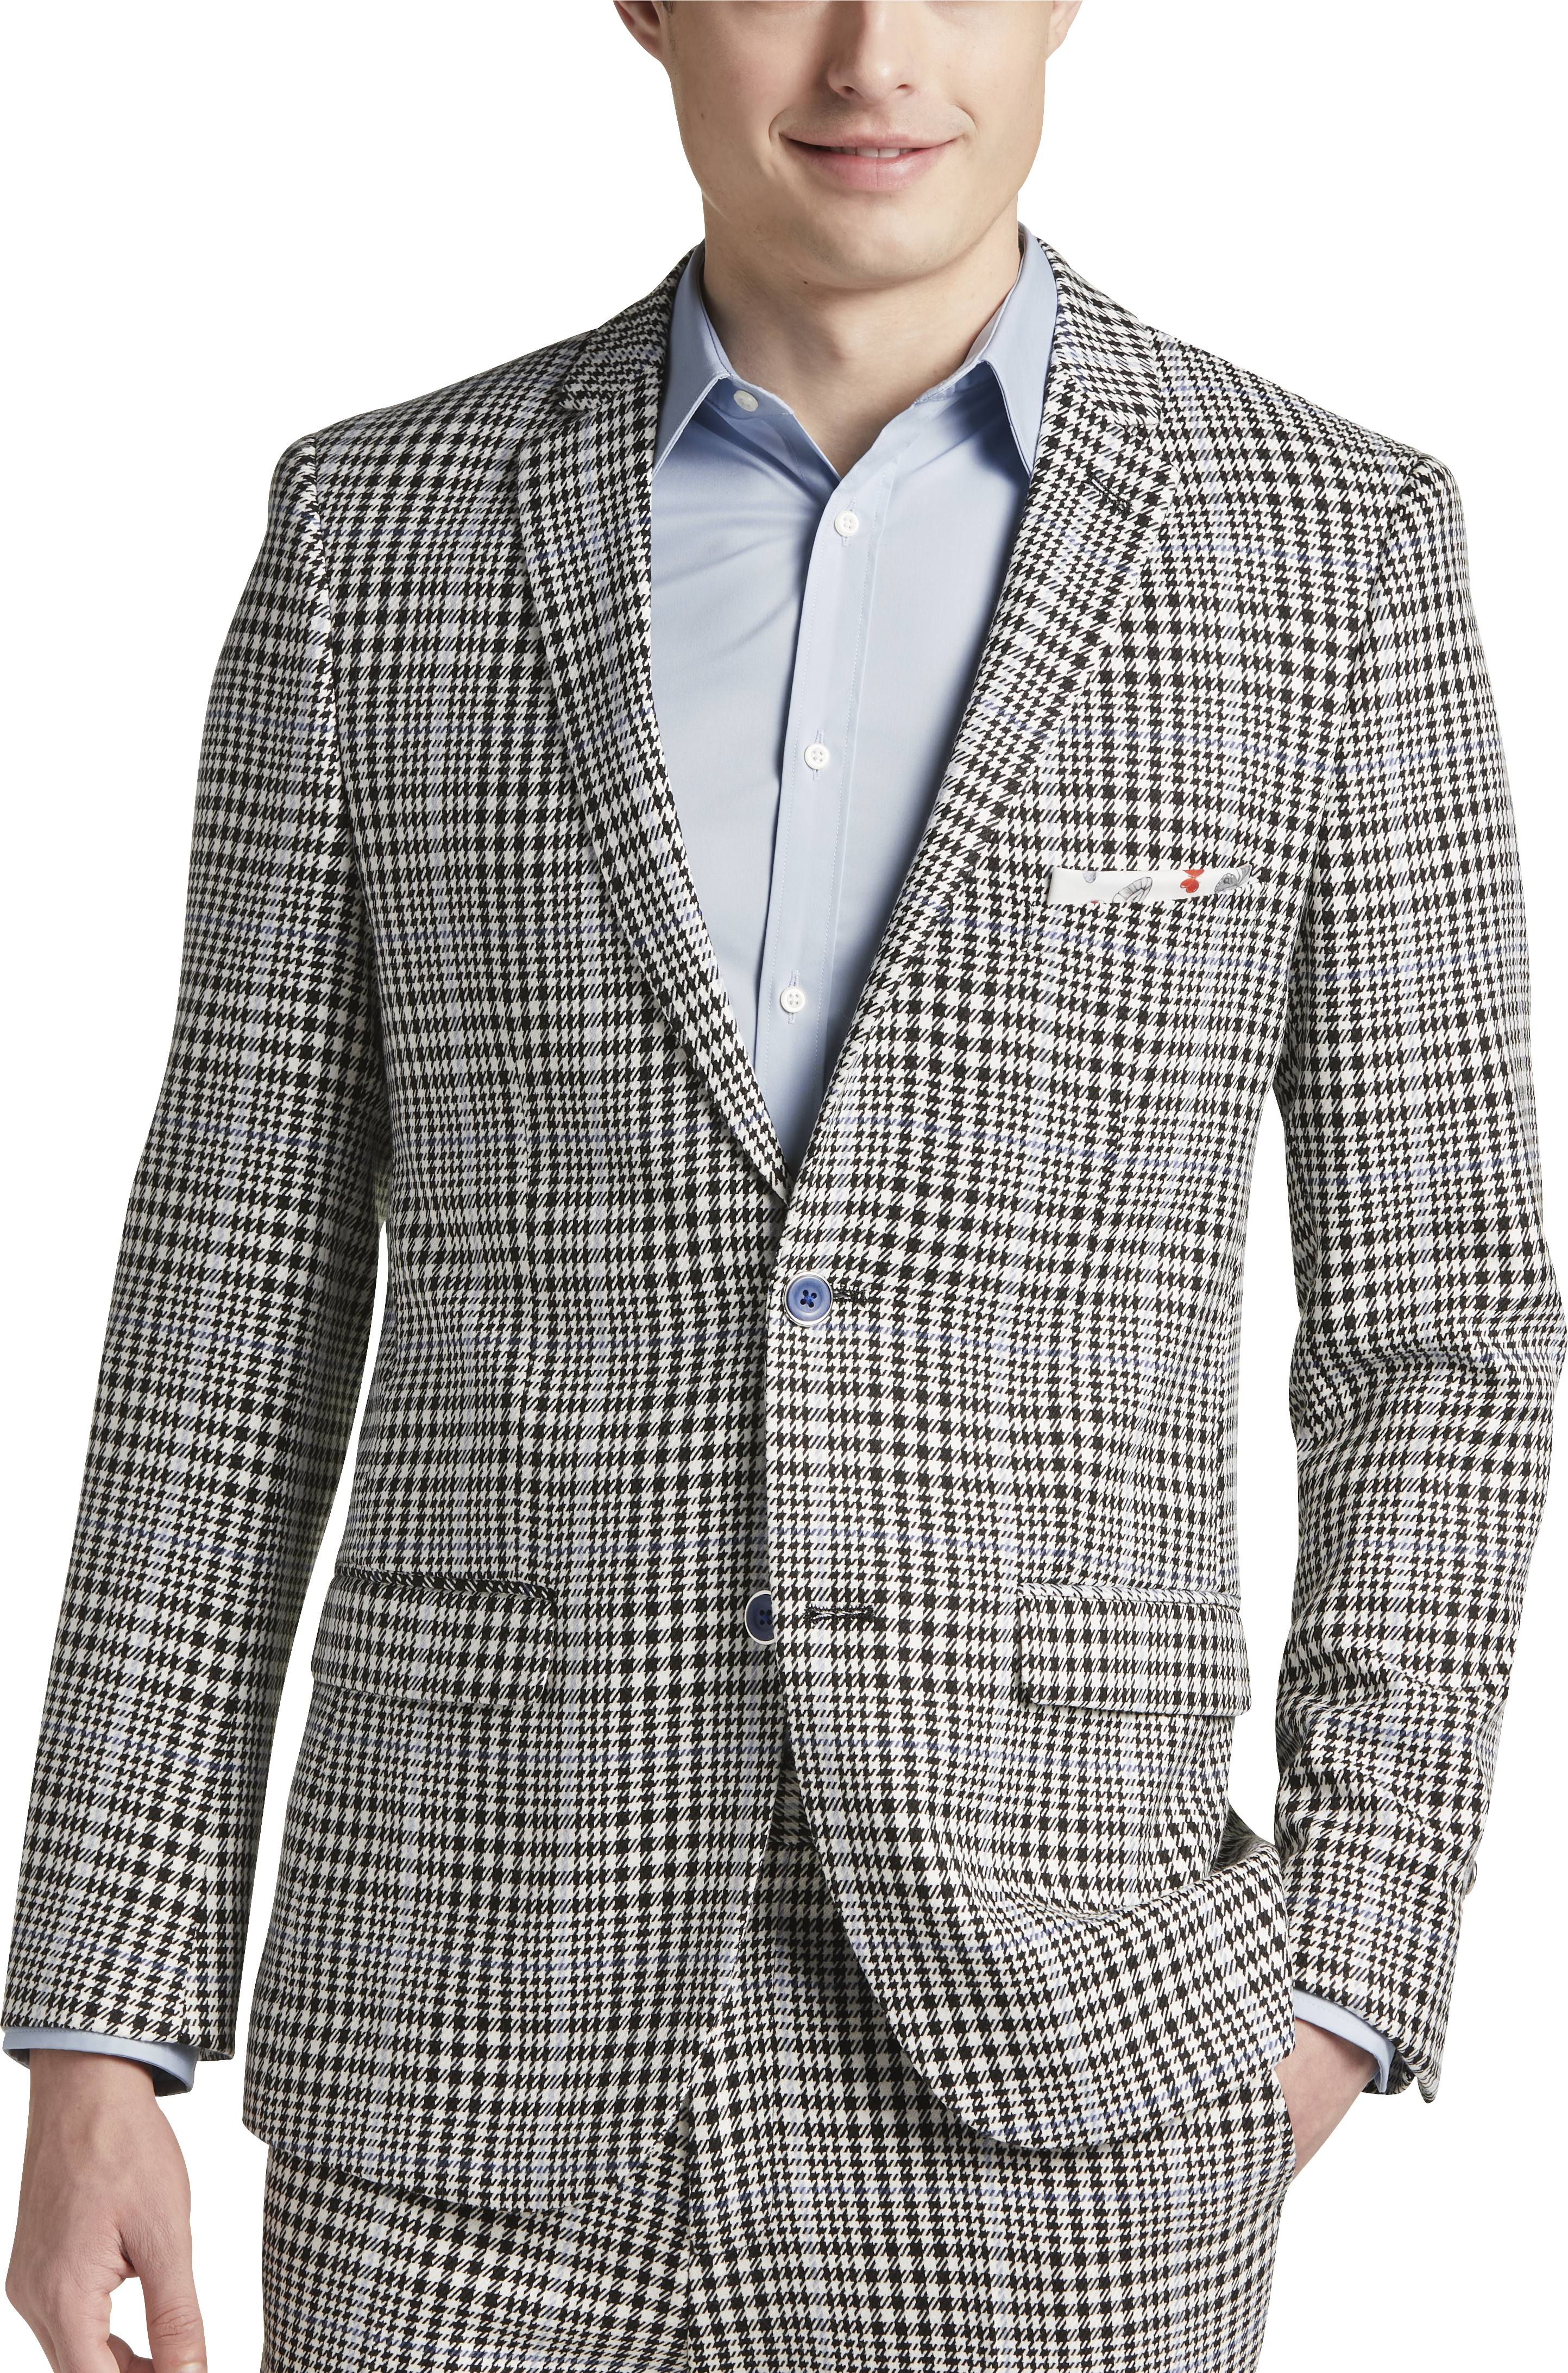 CHECK, HOUNDSTOOTH, PAISLEY - PART TWO